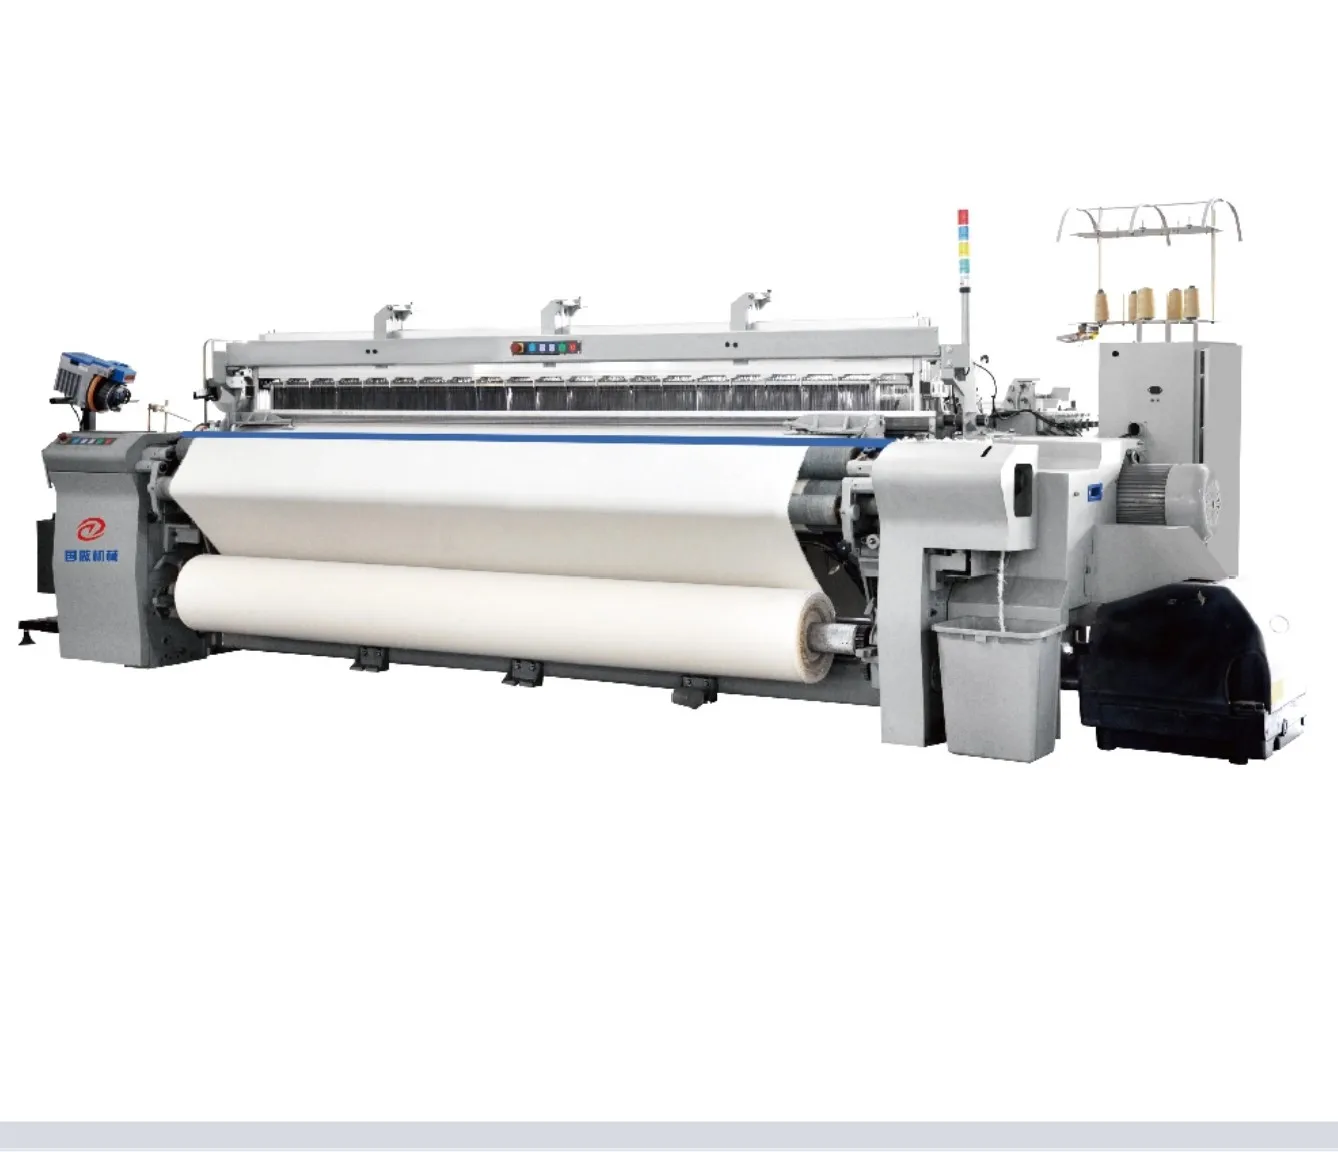 
High speed tsudakoma air jet loom weaving machine and spare parts 